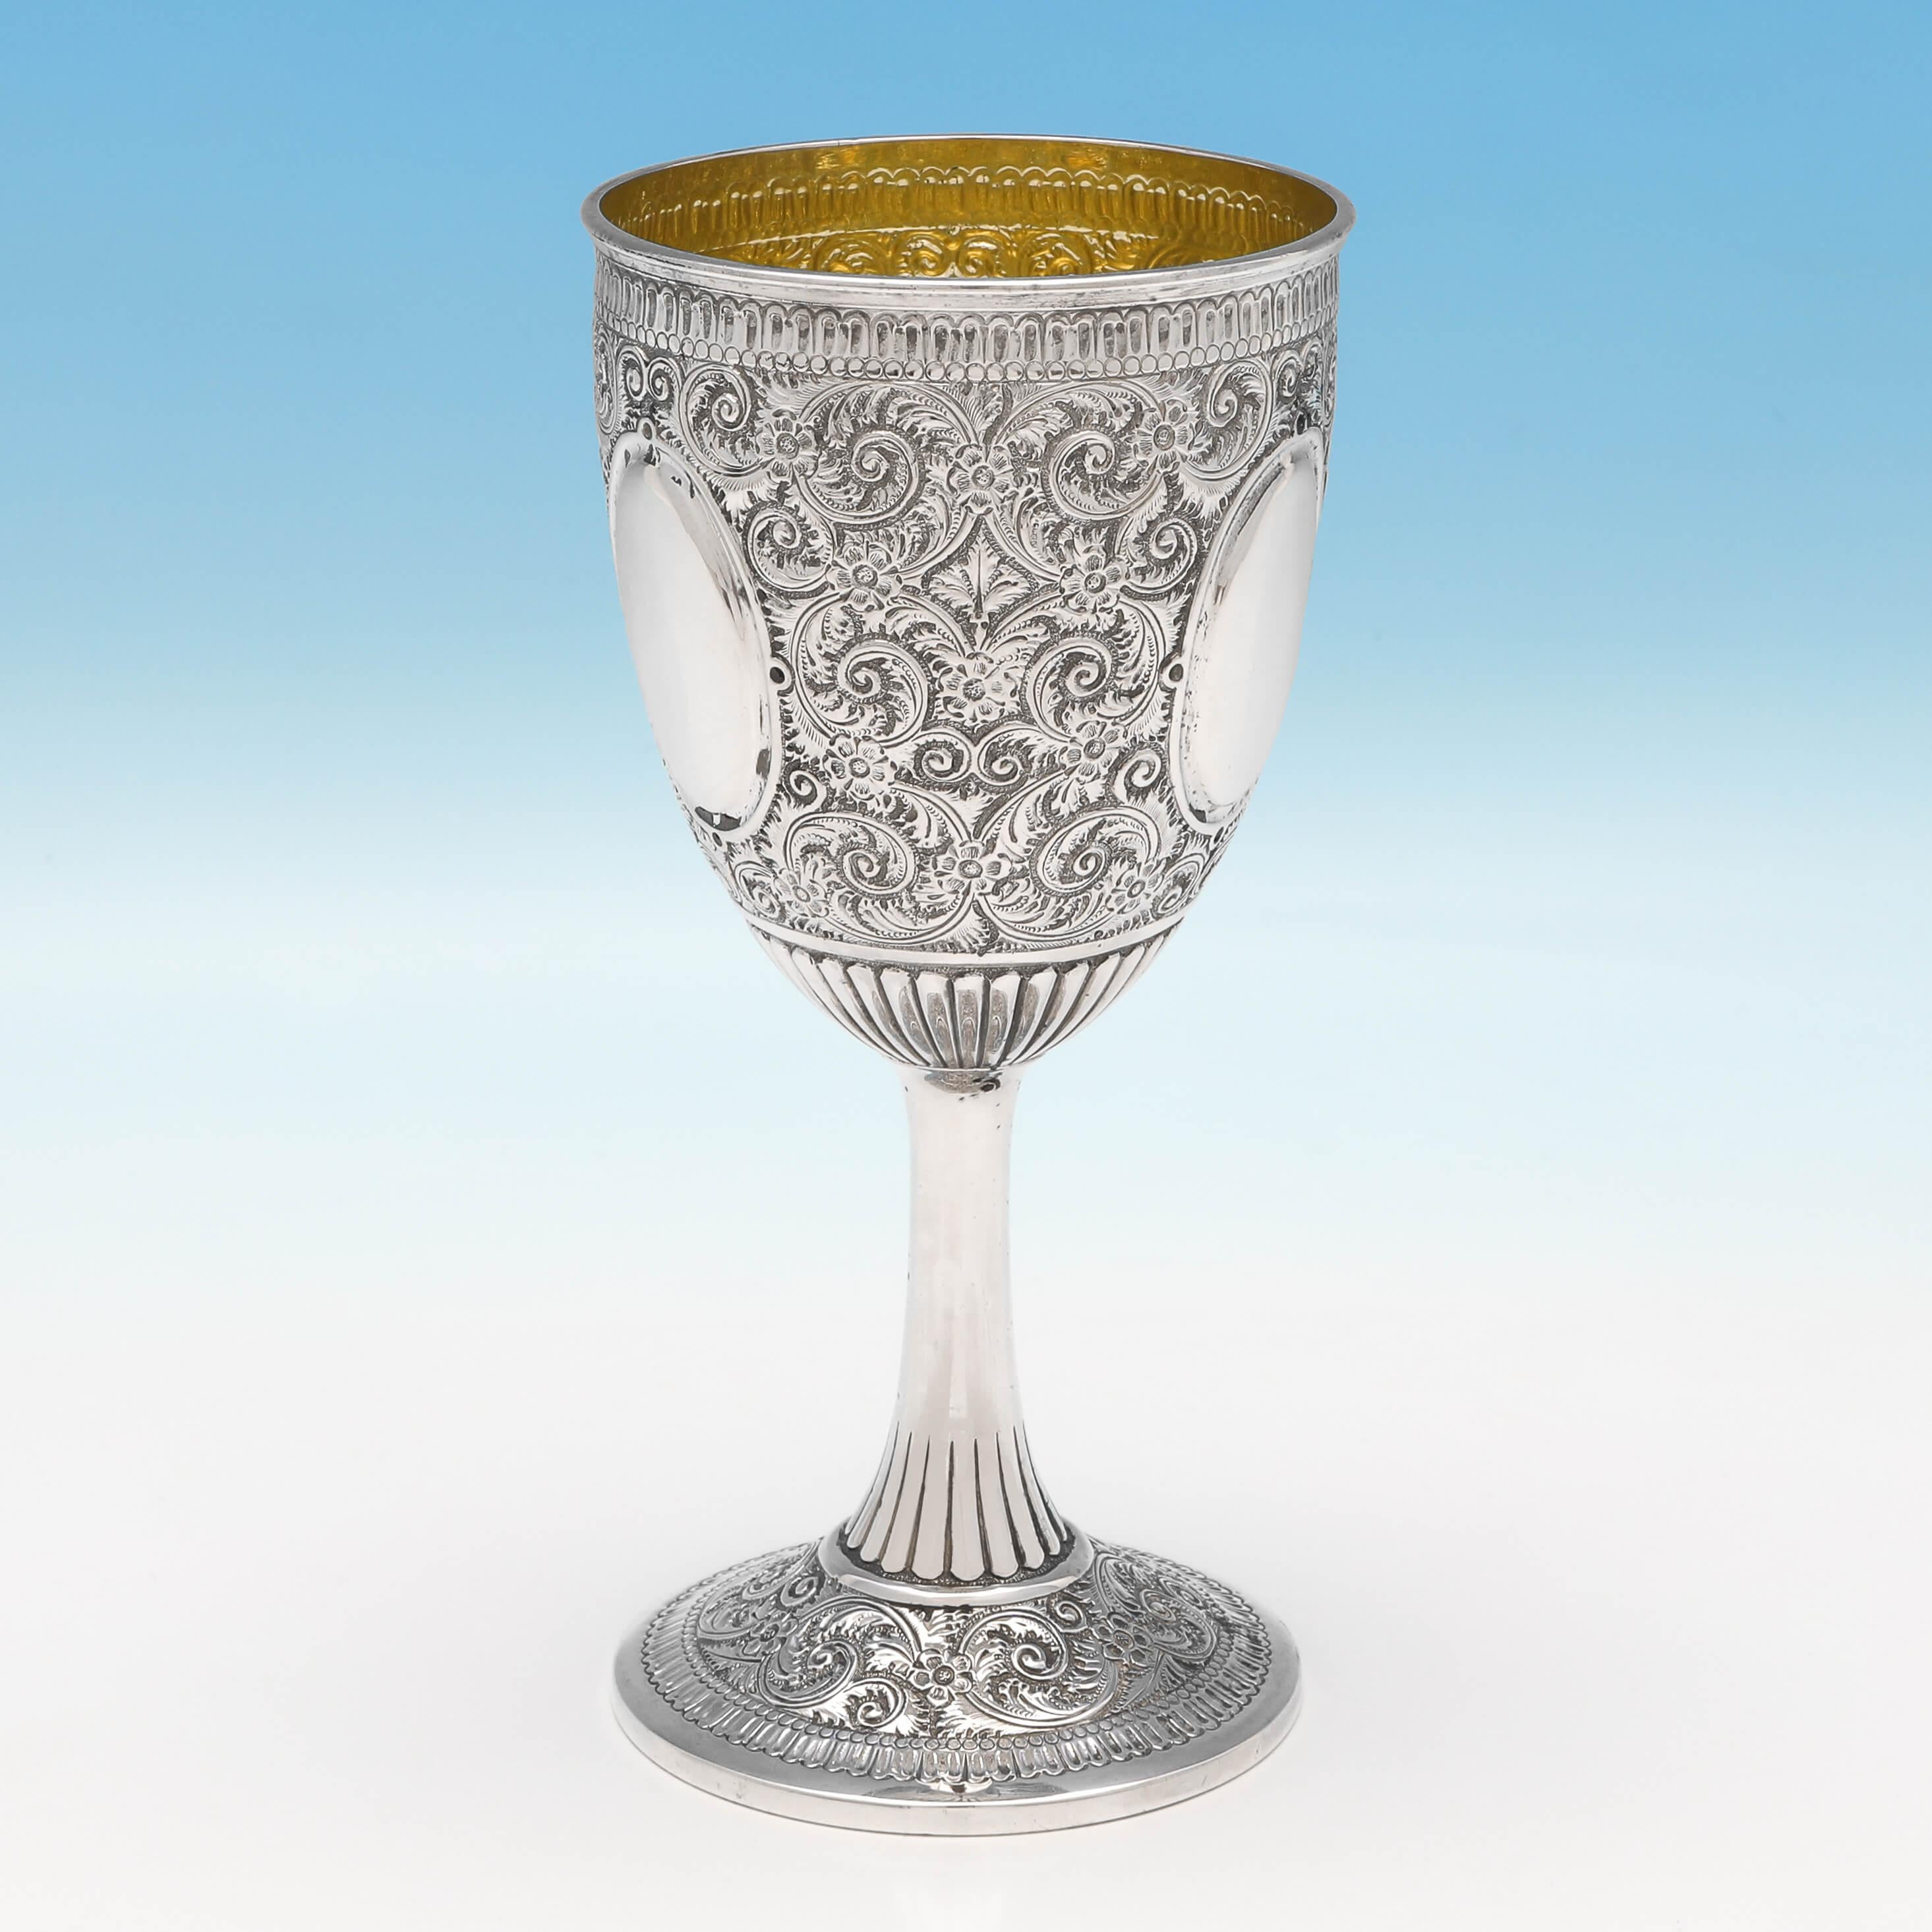 Hallmarked in Sheffield in 1881 by Sibray, Hall & Co., this striking, Victorian, antique sterling silver goblet, features intricate chased decoration throughout, fluted detailing, and a gilt interior. The goblet measures 6.5